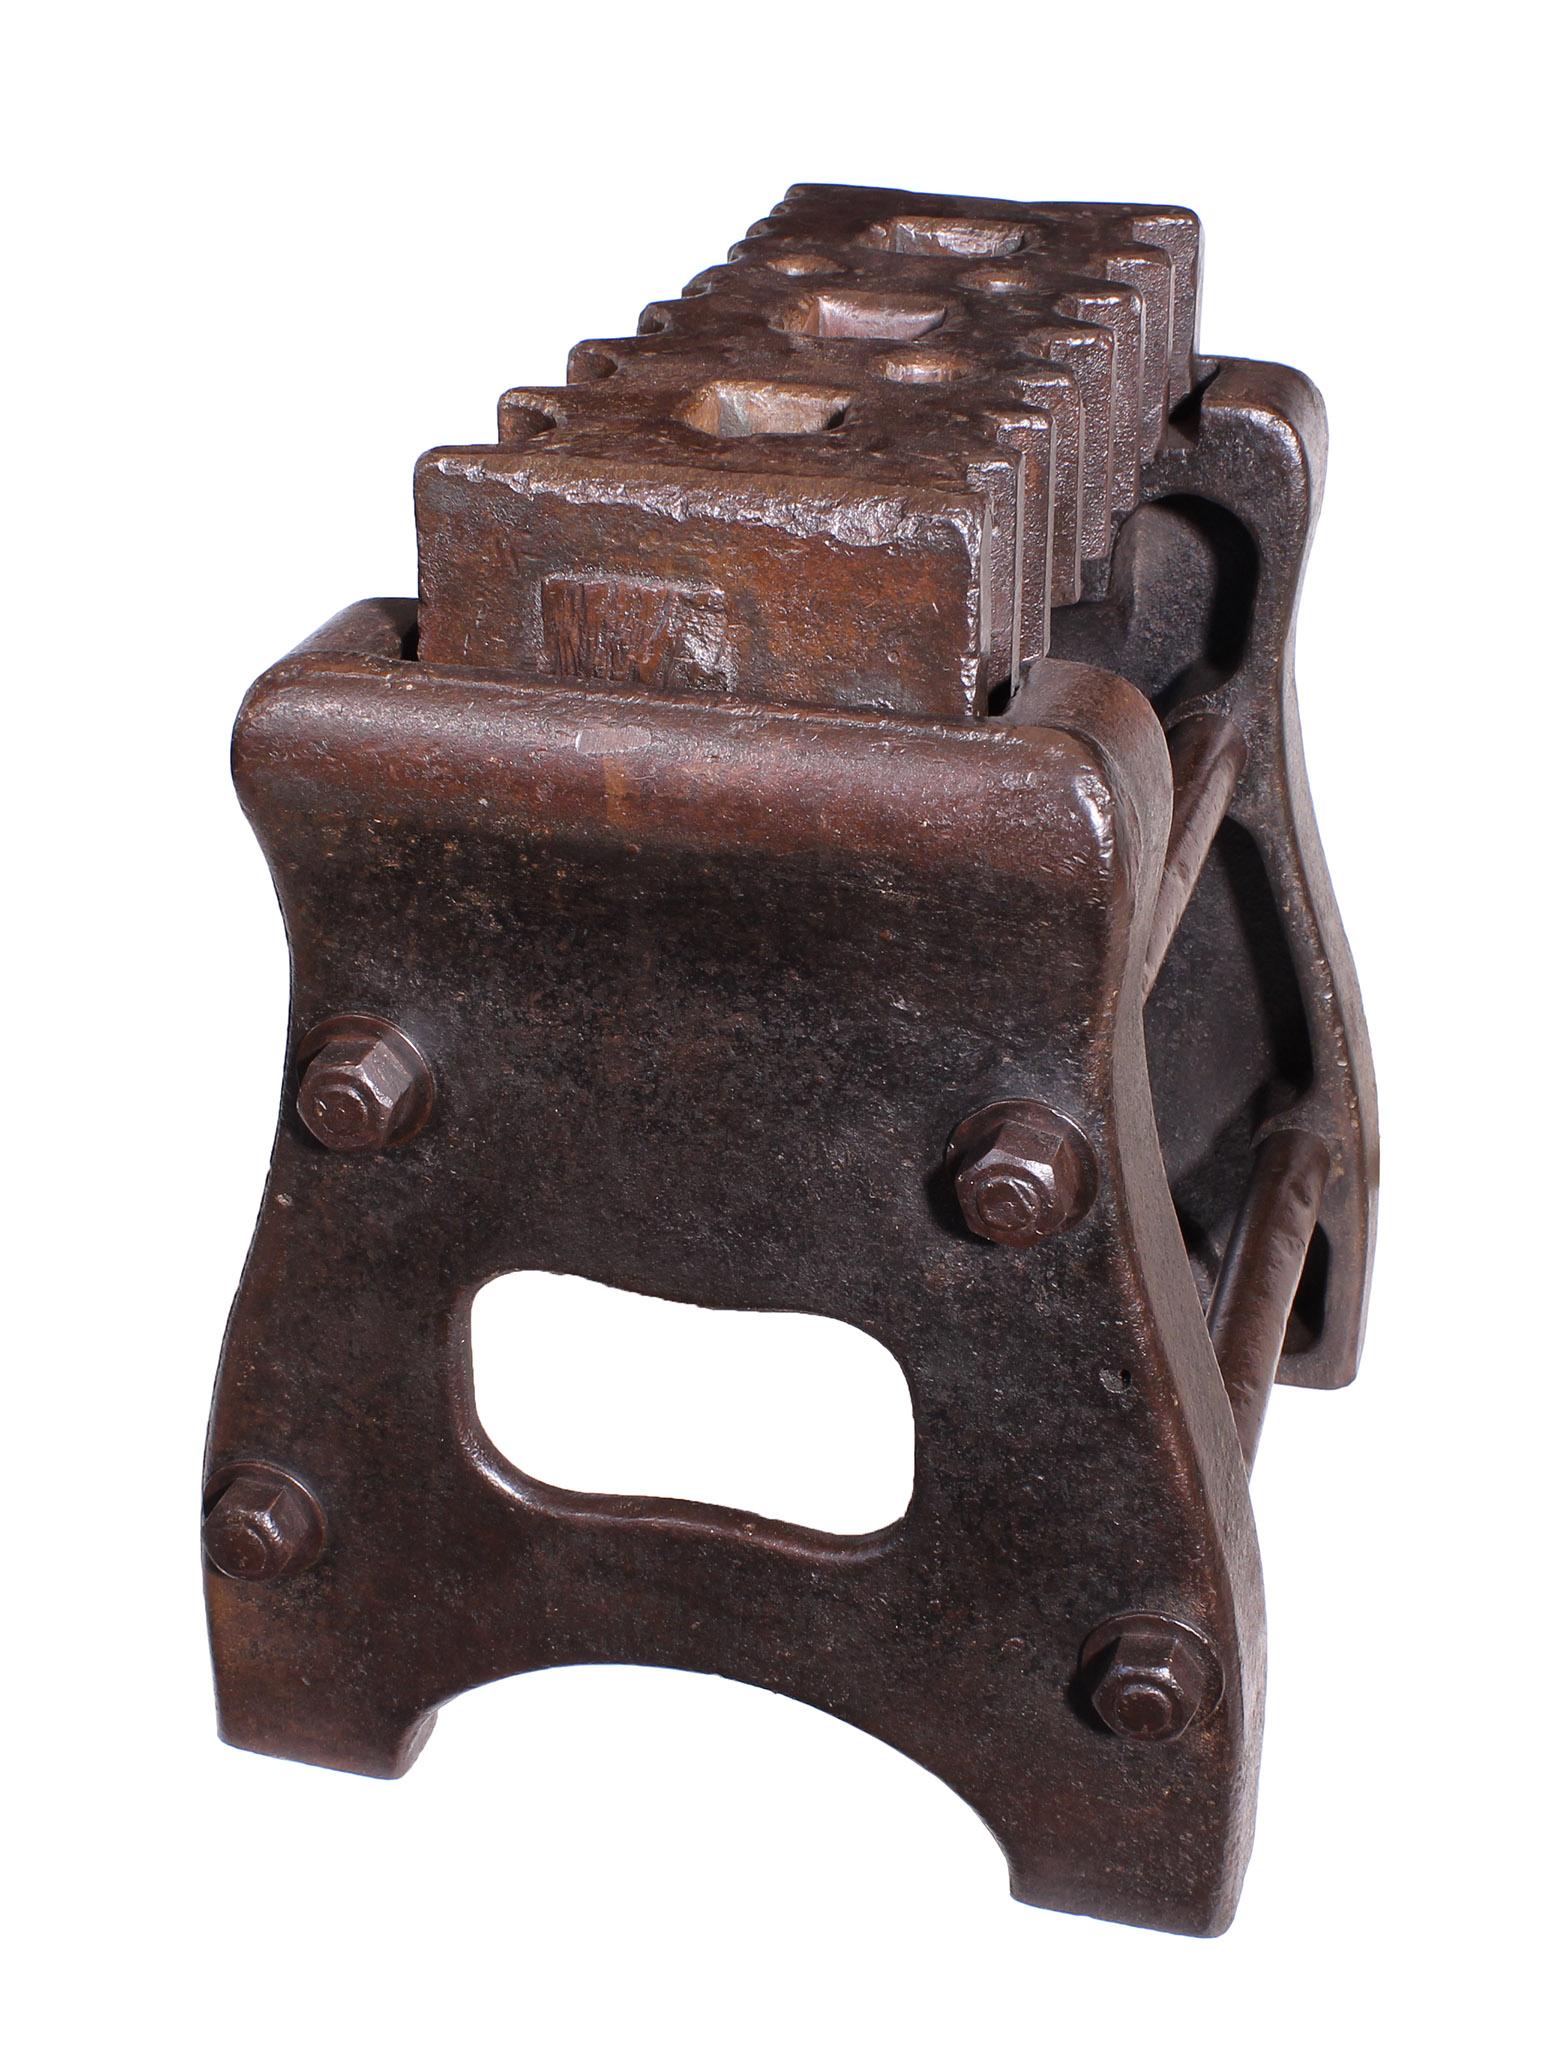 American Authentic Blacksmiths Solid Cast-Iron Swage Block